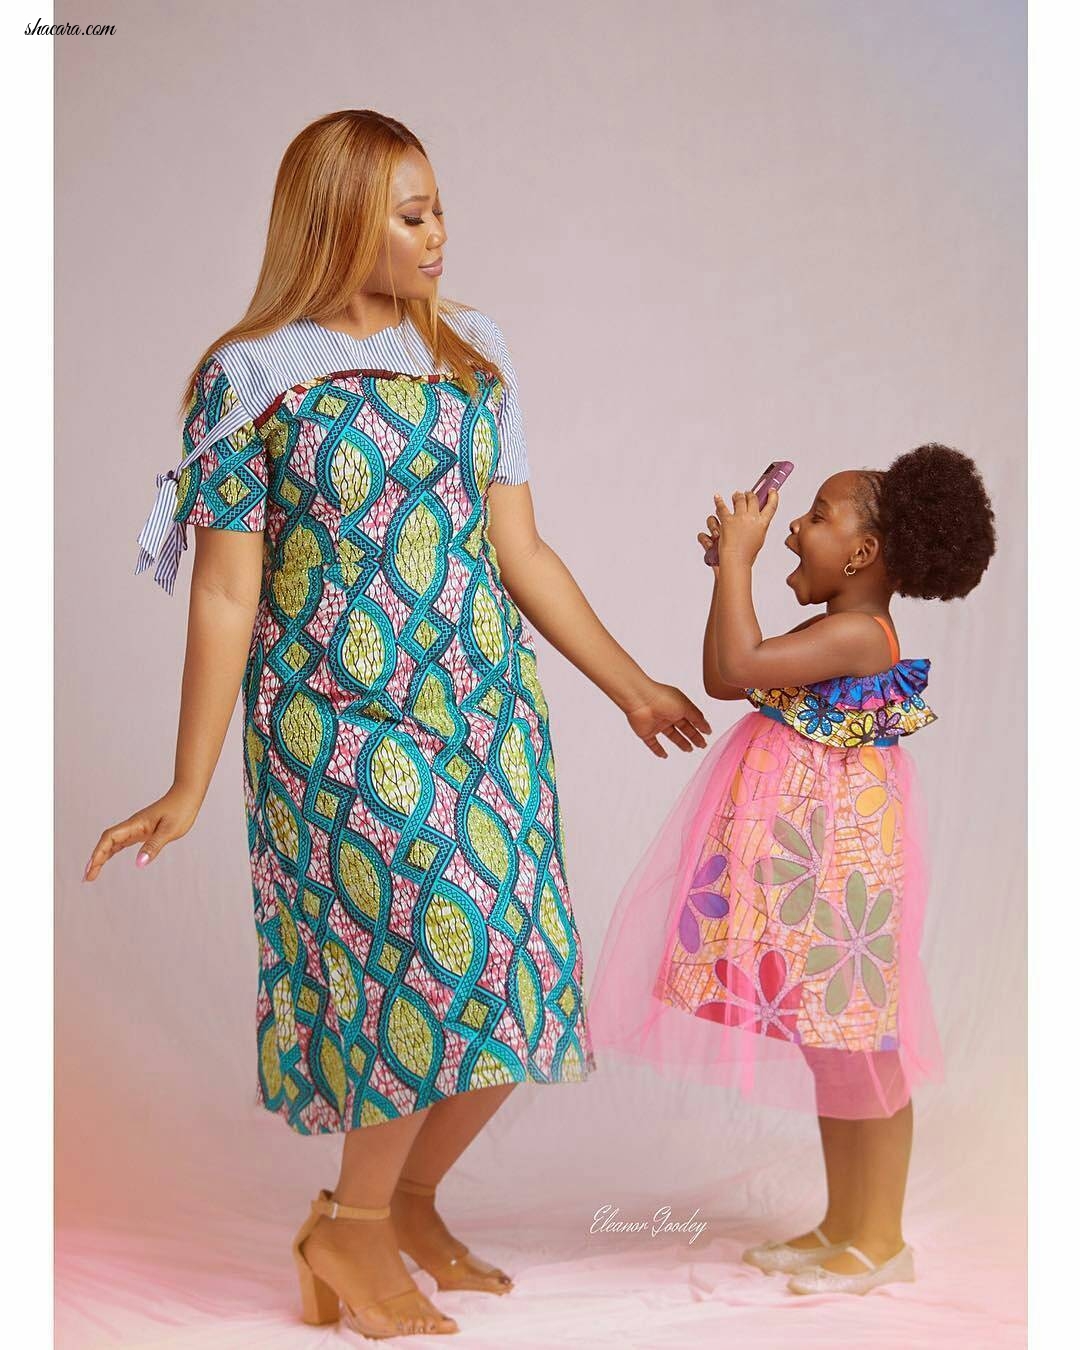 MOMMY AND ME! A CUTE TREND KIDS ARE LOVING THIS SEASON